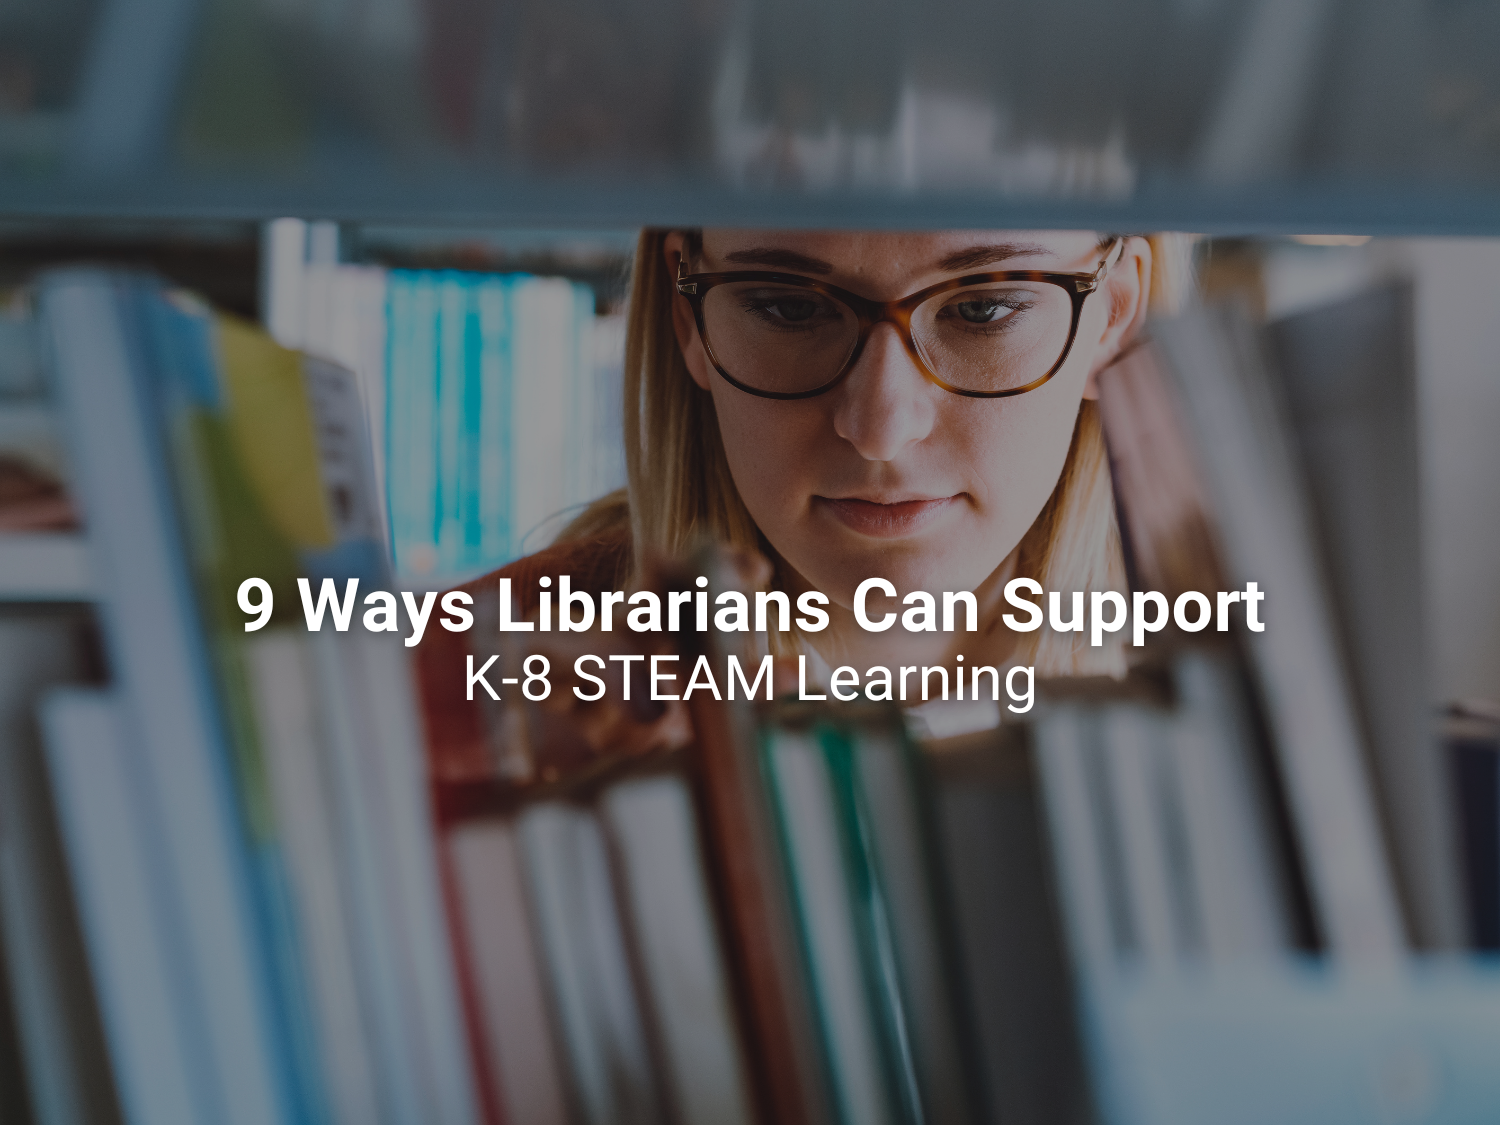 9 Ways Librarians Can Support K-8 STEAM Learning